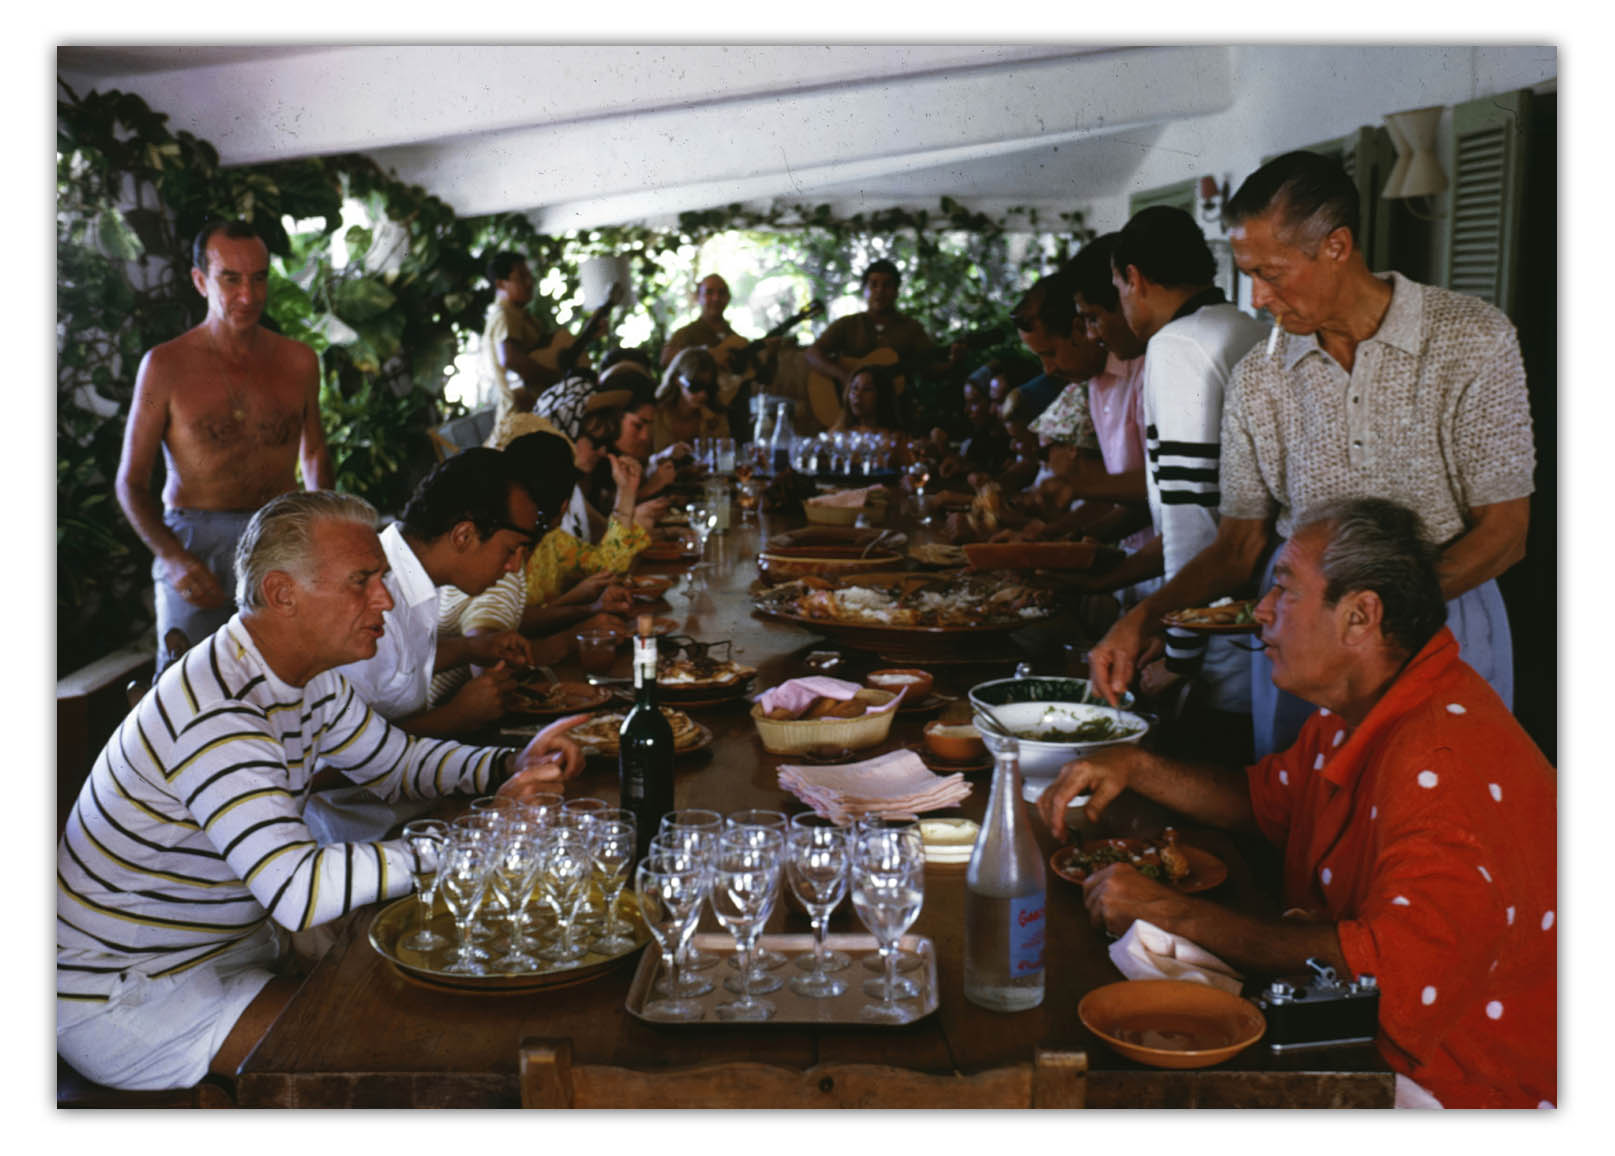 Acapulco Lunch by Slim Aarons